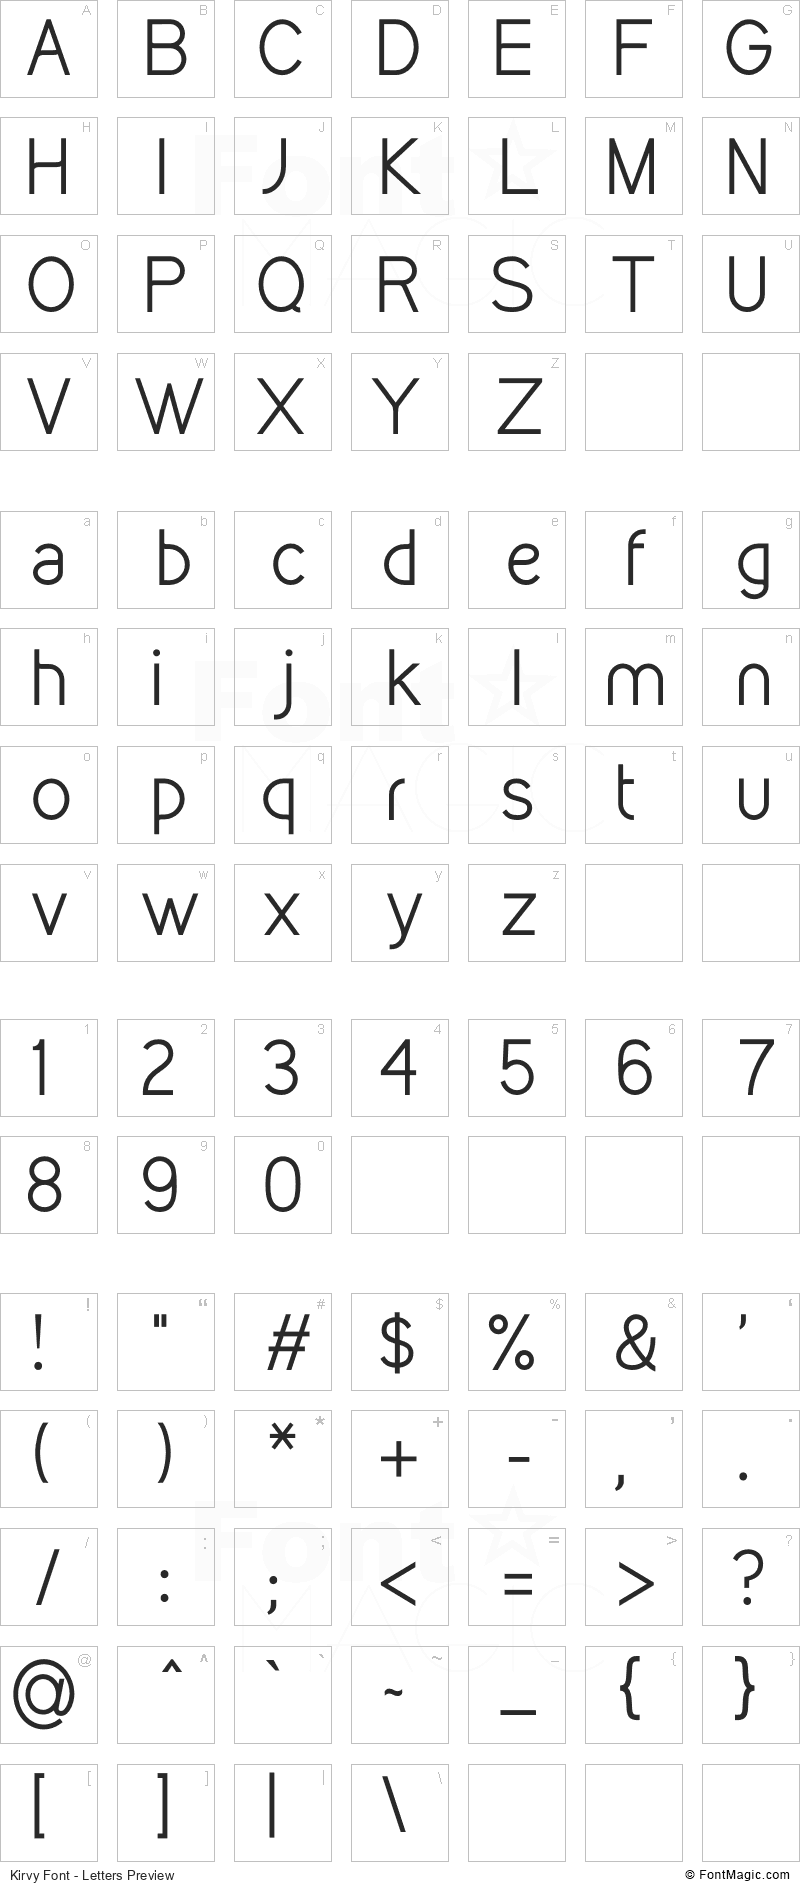 Kirvy Font - All Latters Preview Chart